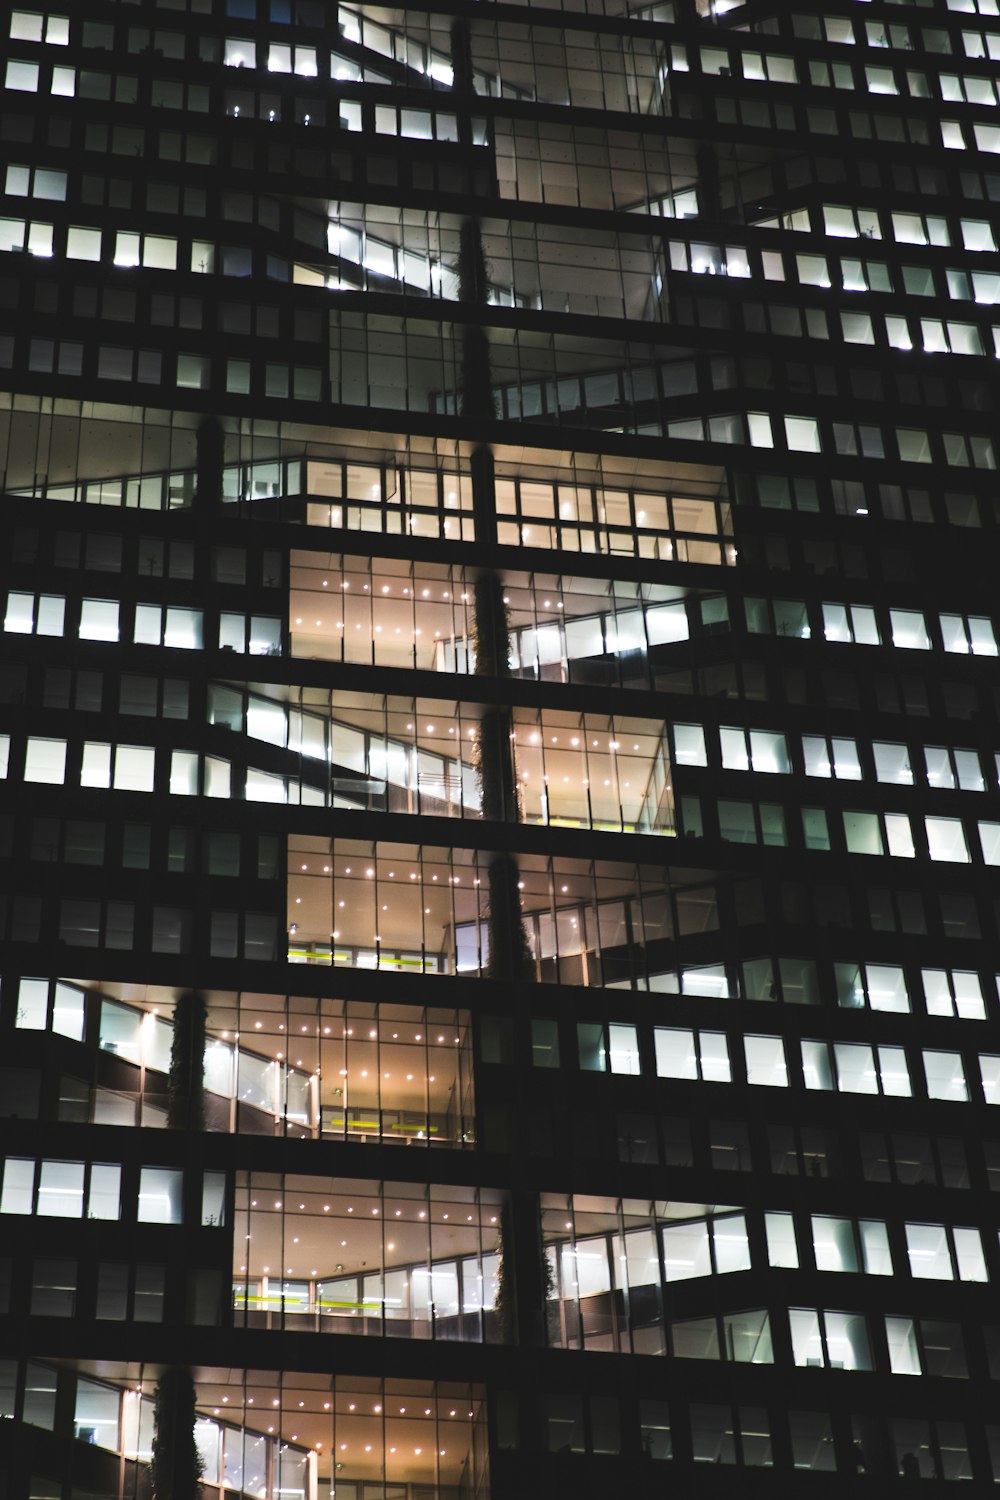 clear glass window building during night time